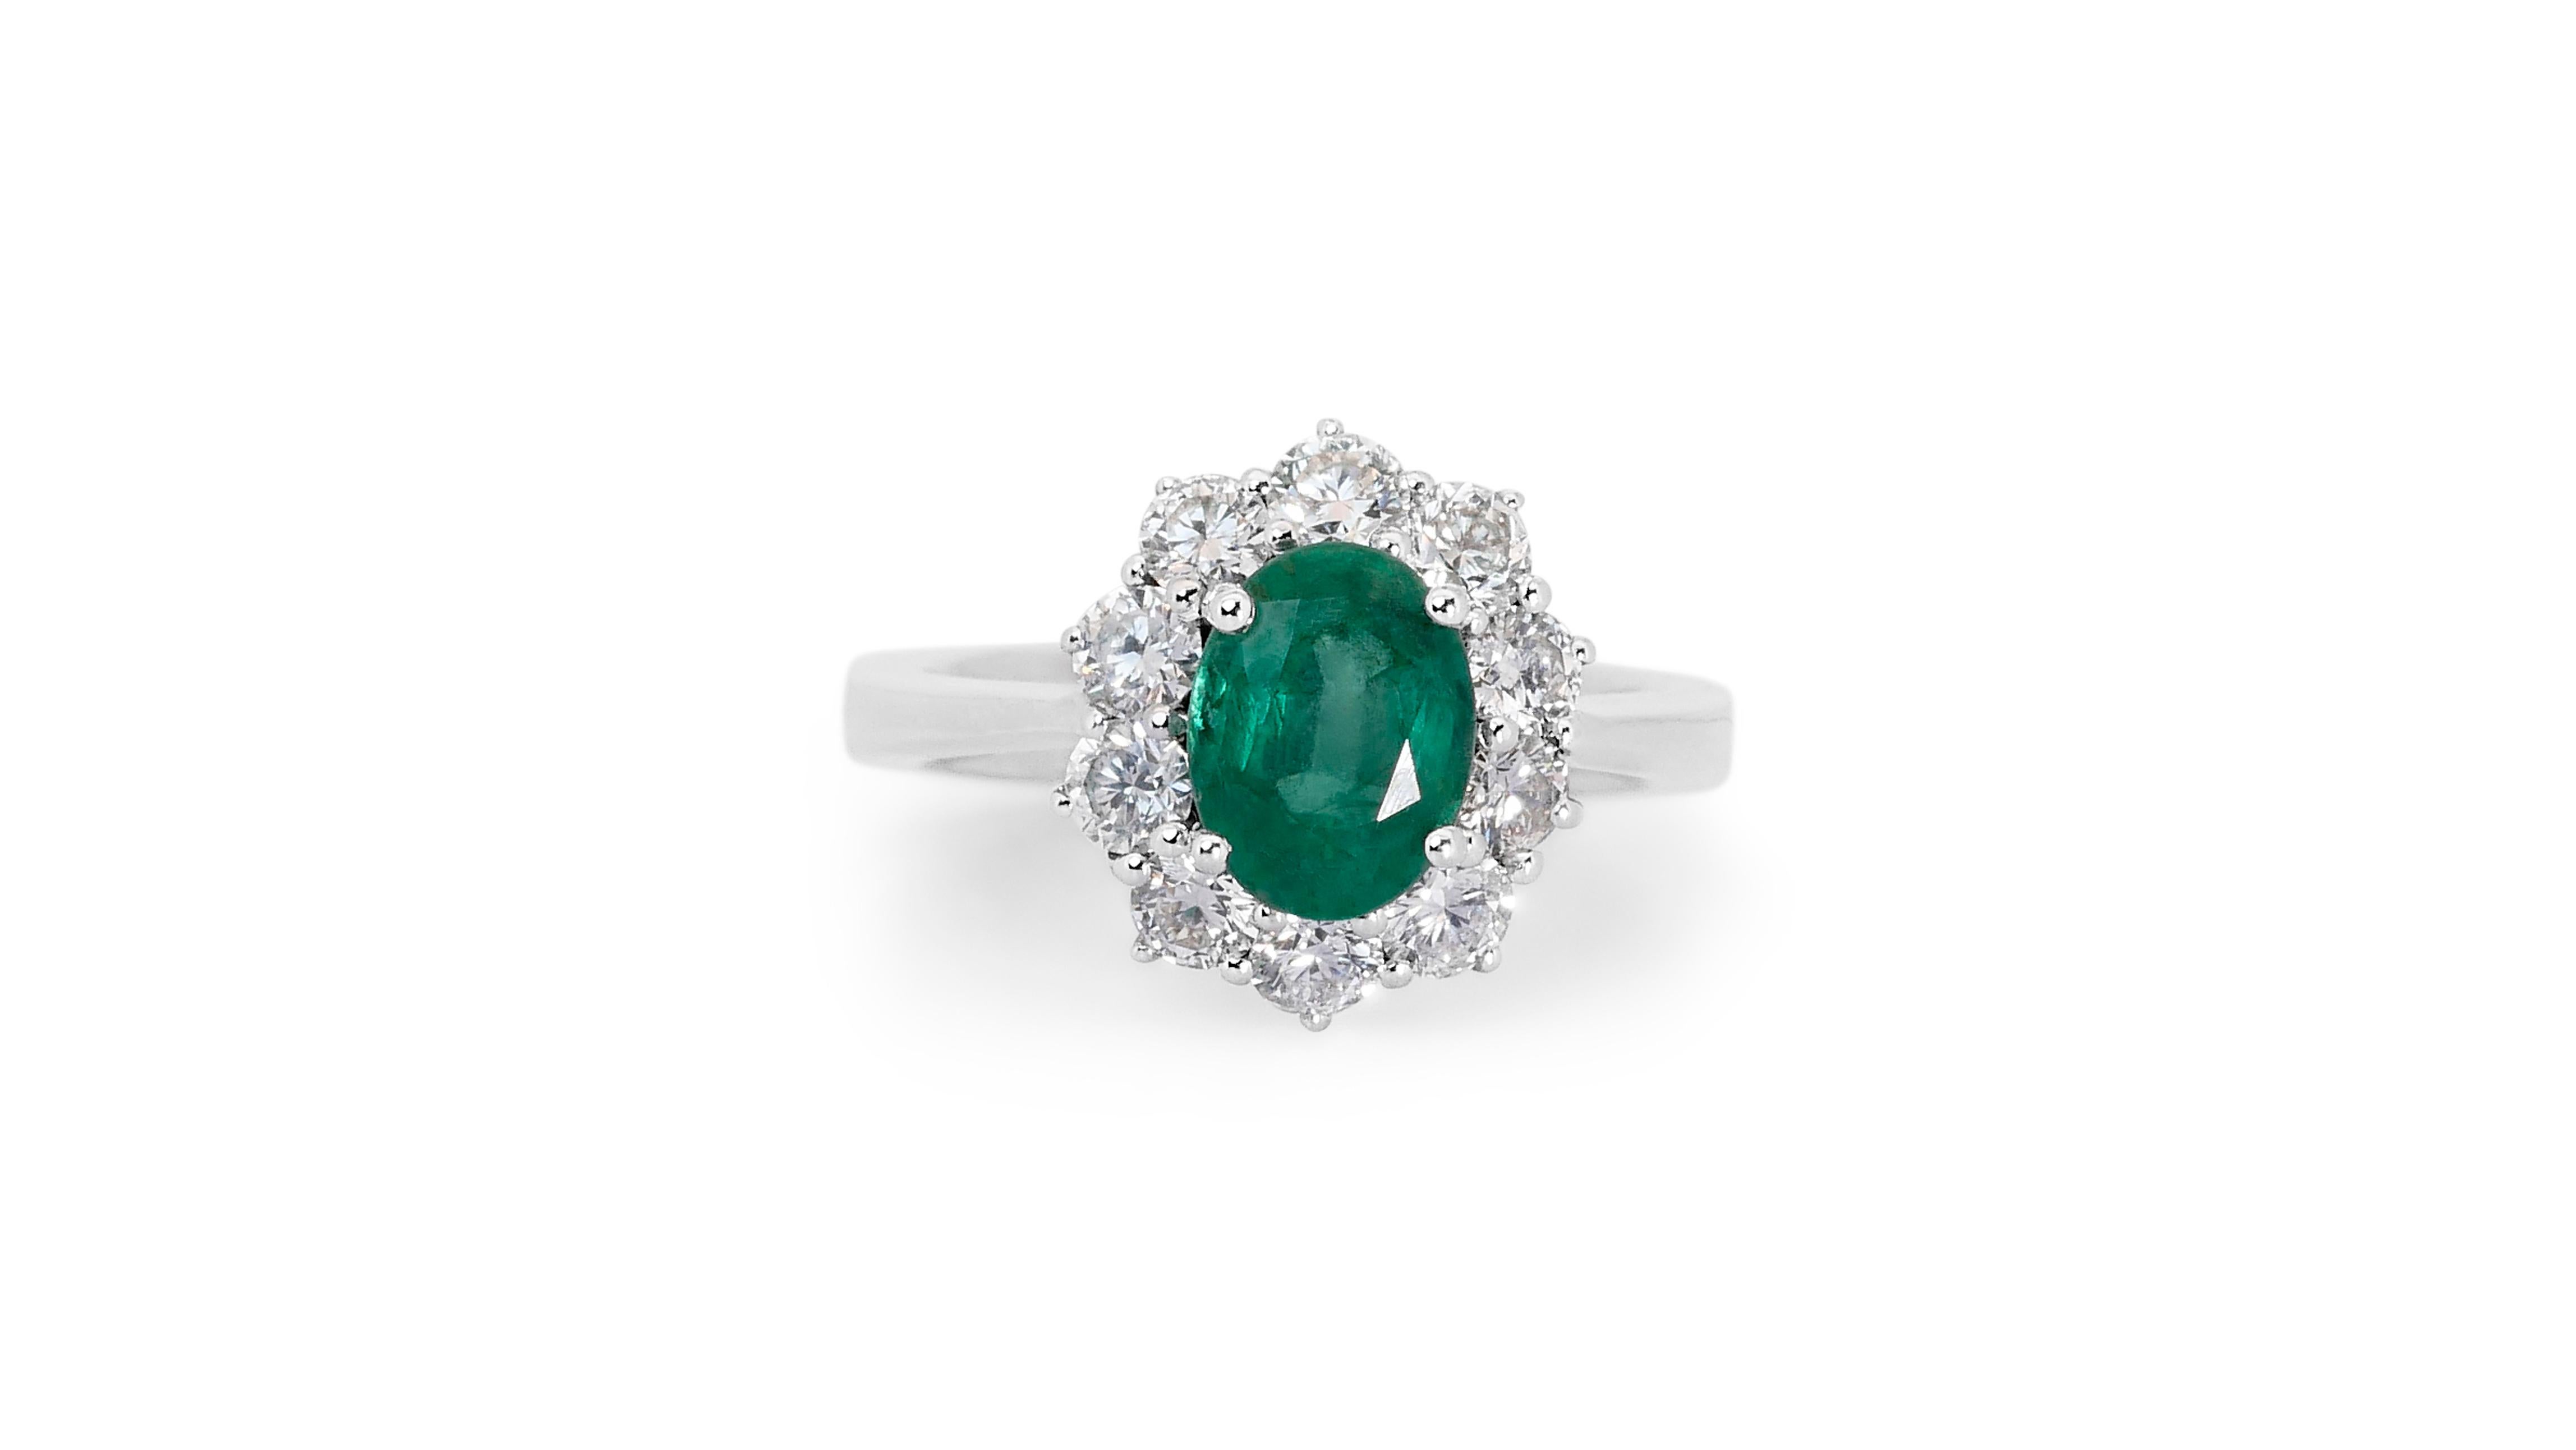 A glamorous flower-style ring with a stunning 1.5-carat oval mixed-cut natural emerald. It has 1 carat of side diamonds which add more to its elegance. The jewelry is made of 14K White Gold with a high-quality polish. It comes with an IGI